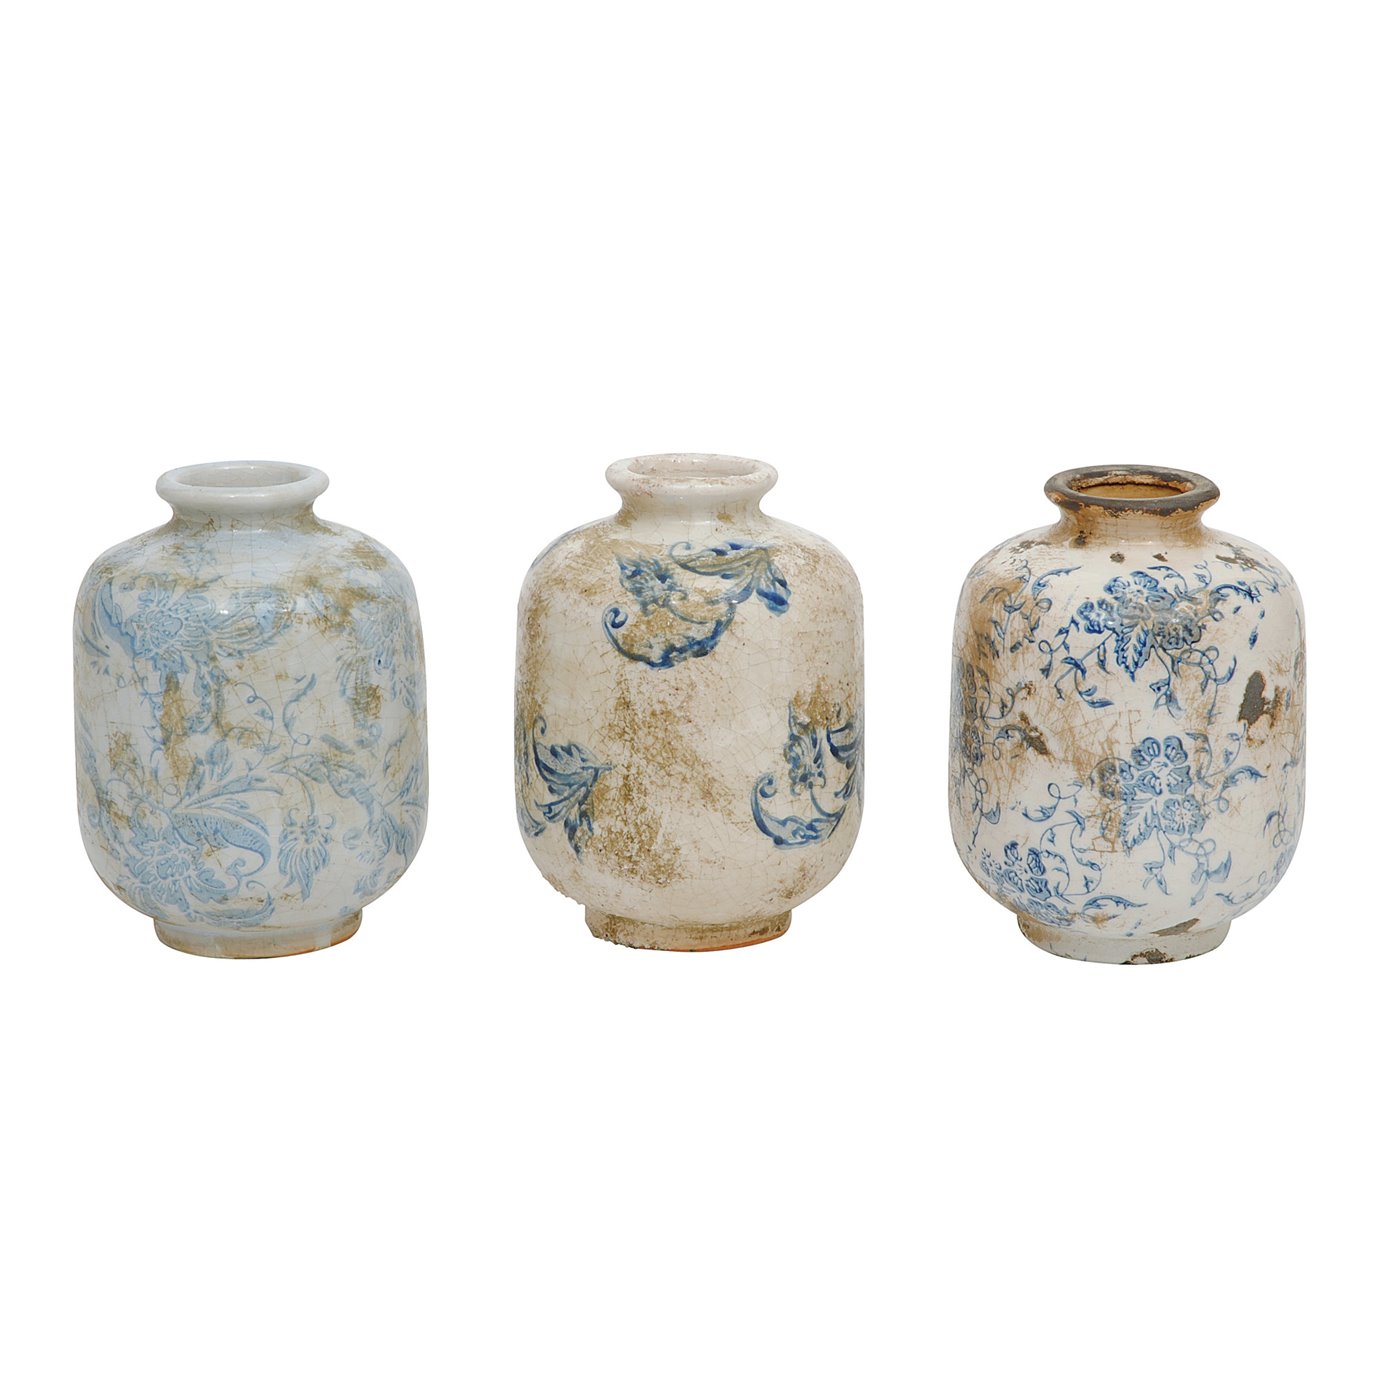 Blue & White Decorative Terracotta Vases with Heavy Distressing (Set of 3 Designs)